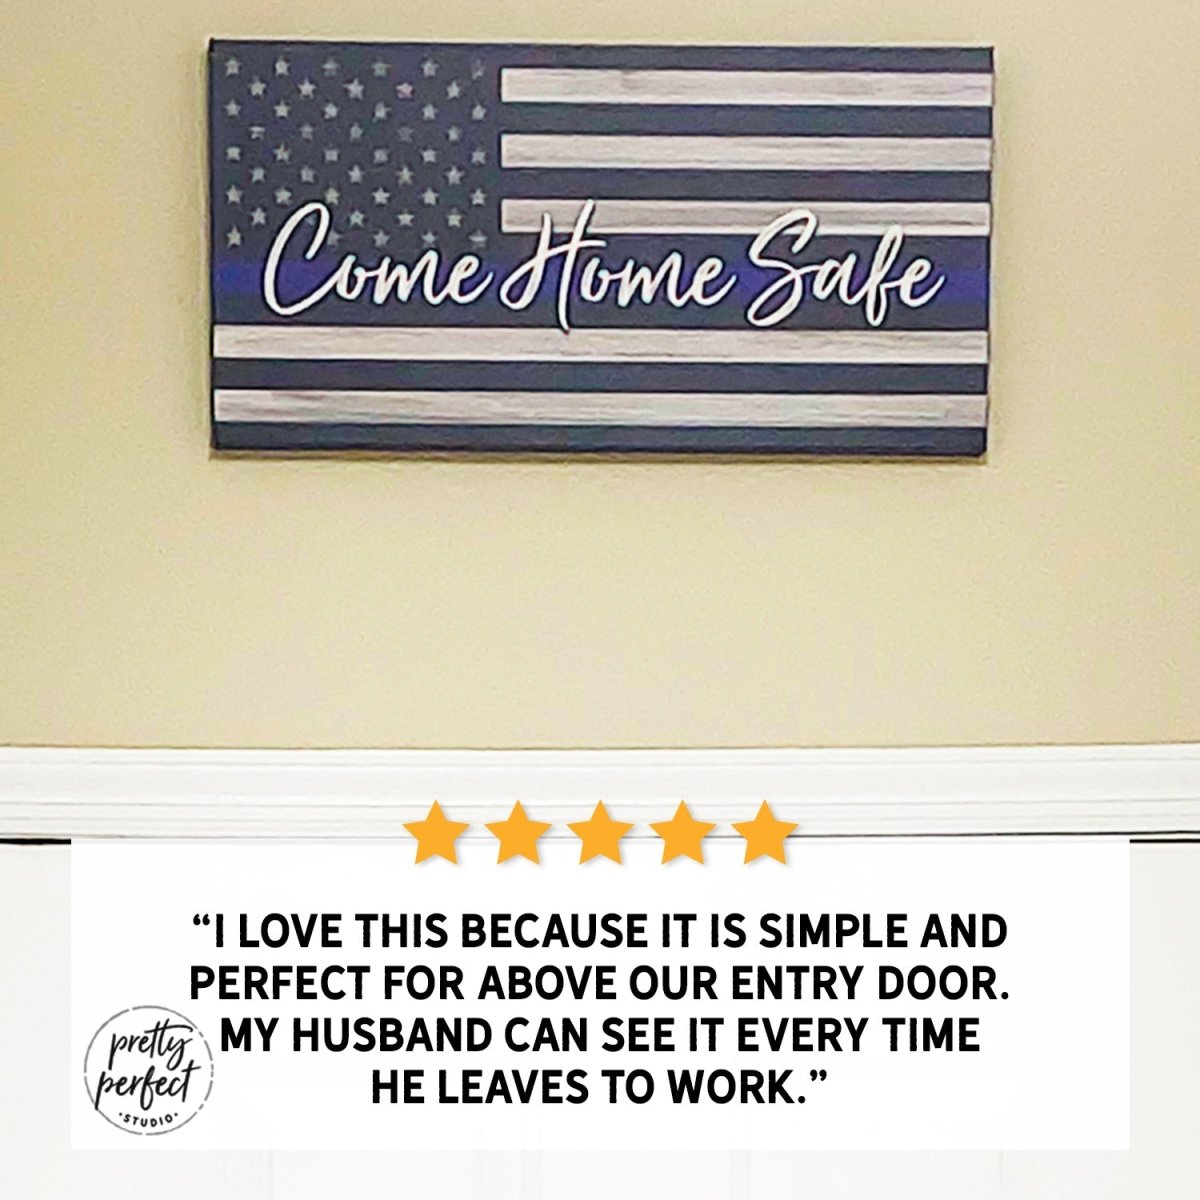 Customer product review for come home safe thin blue line sign by Pretty Perfect Studio